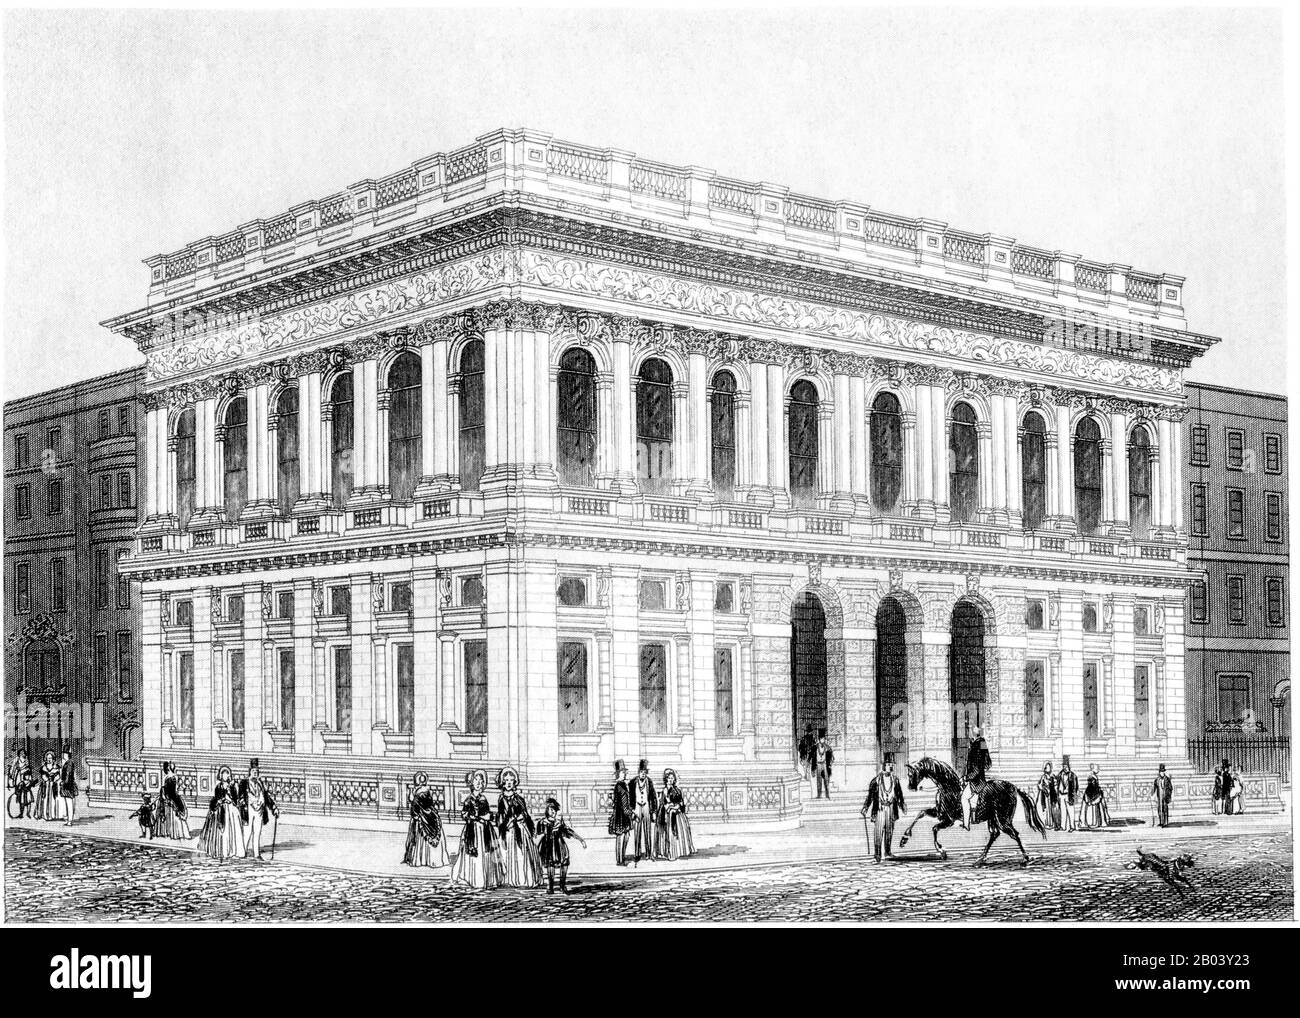 An engraving of the Army and Navy Club House, Pall Mall, London scanned at high resolution from a book printed in 1851. Believed copyright free. Stock Photo